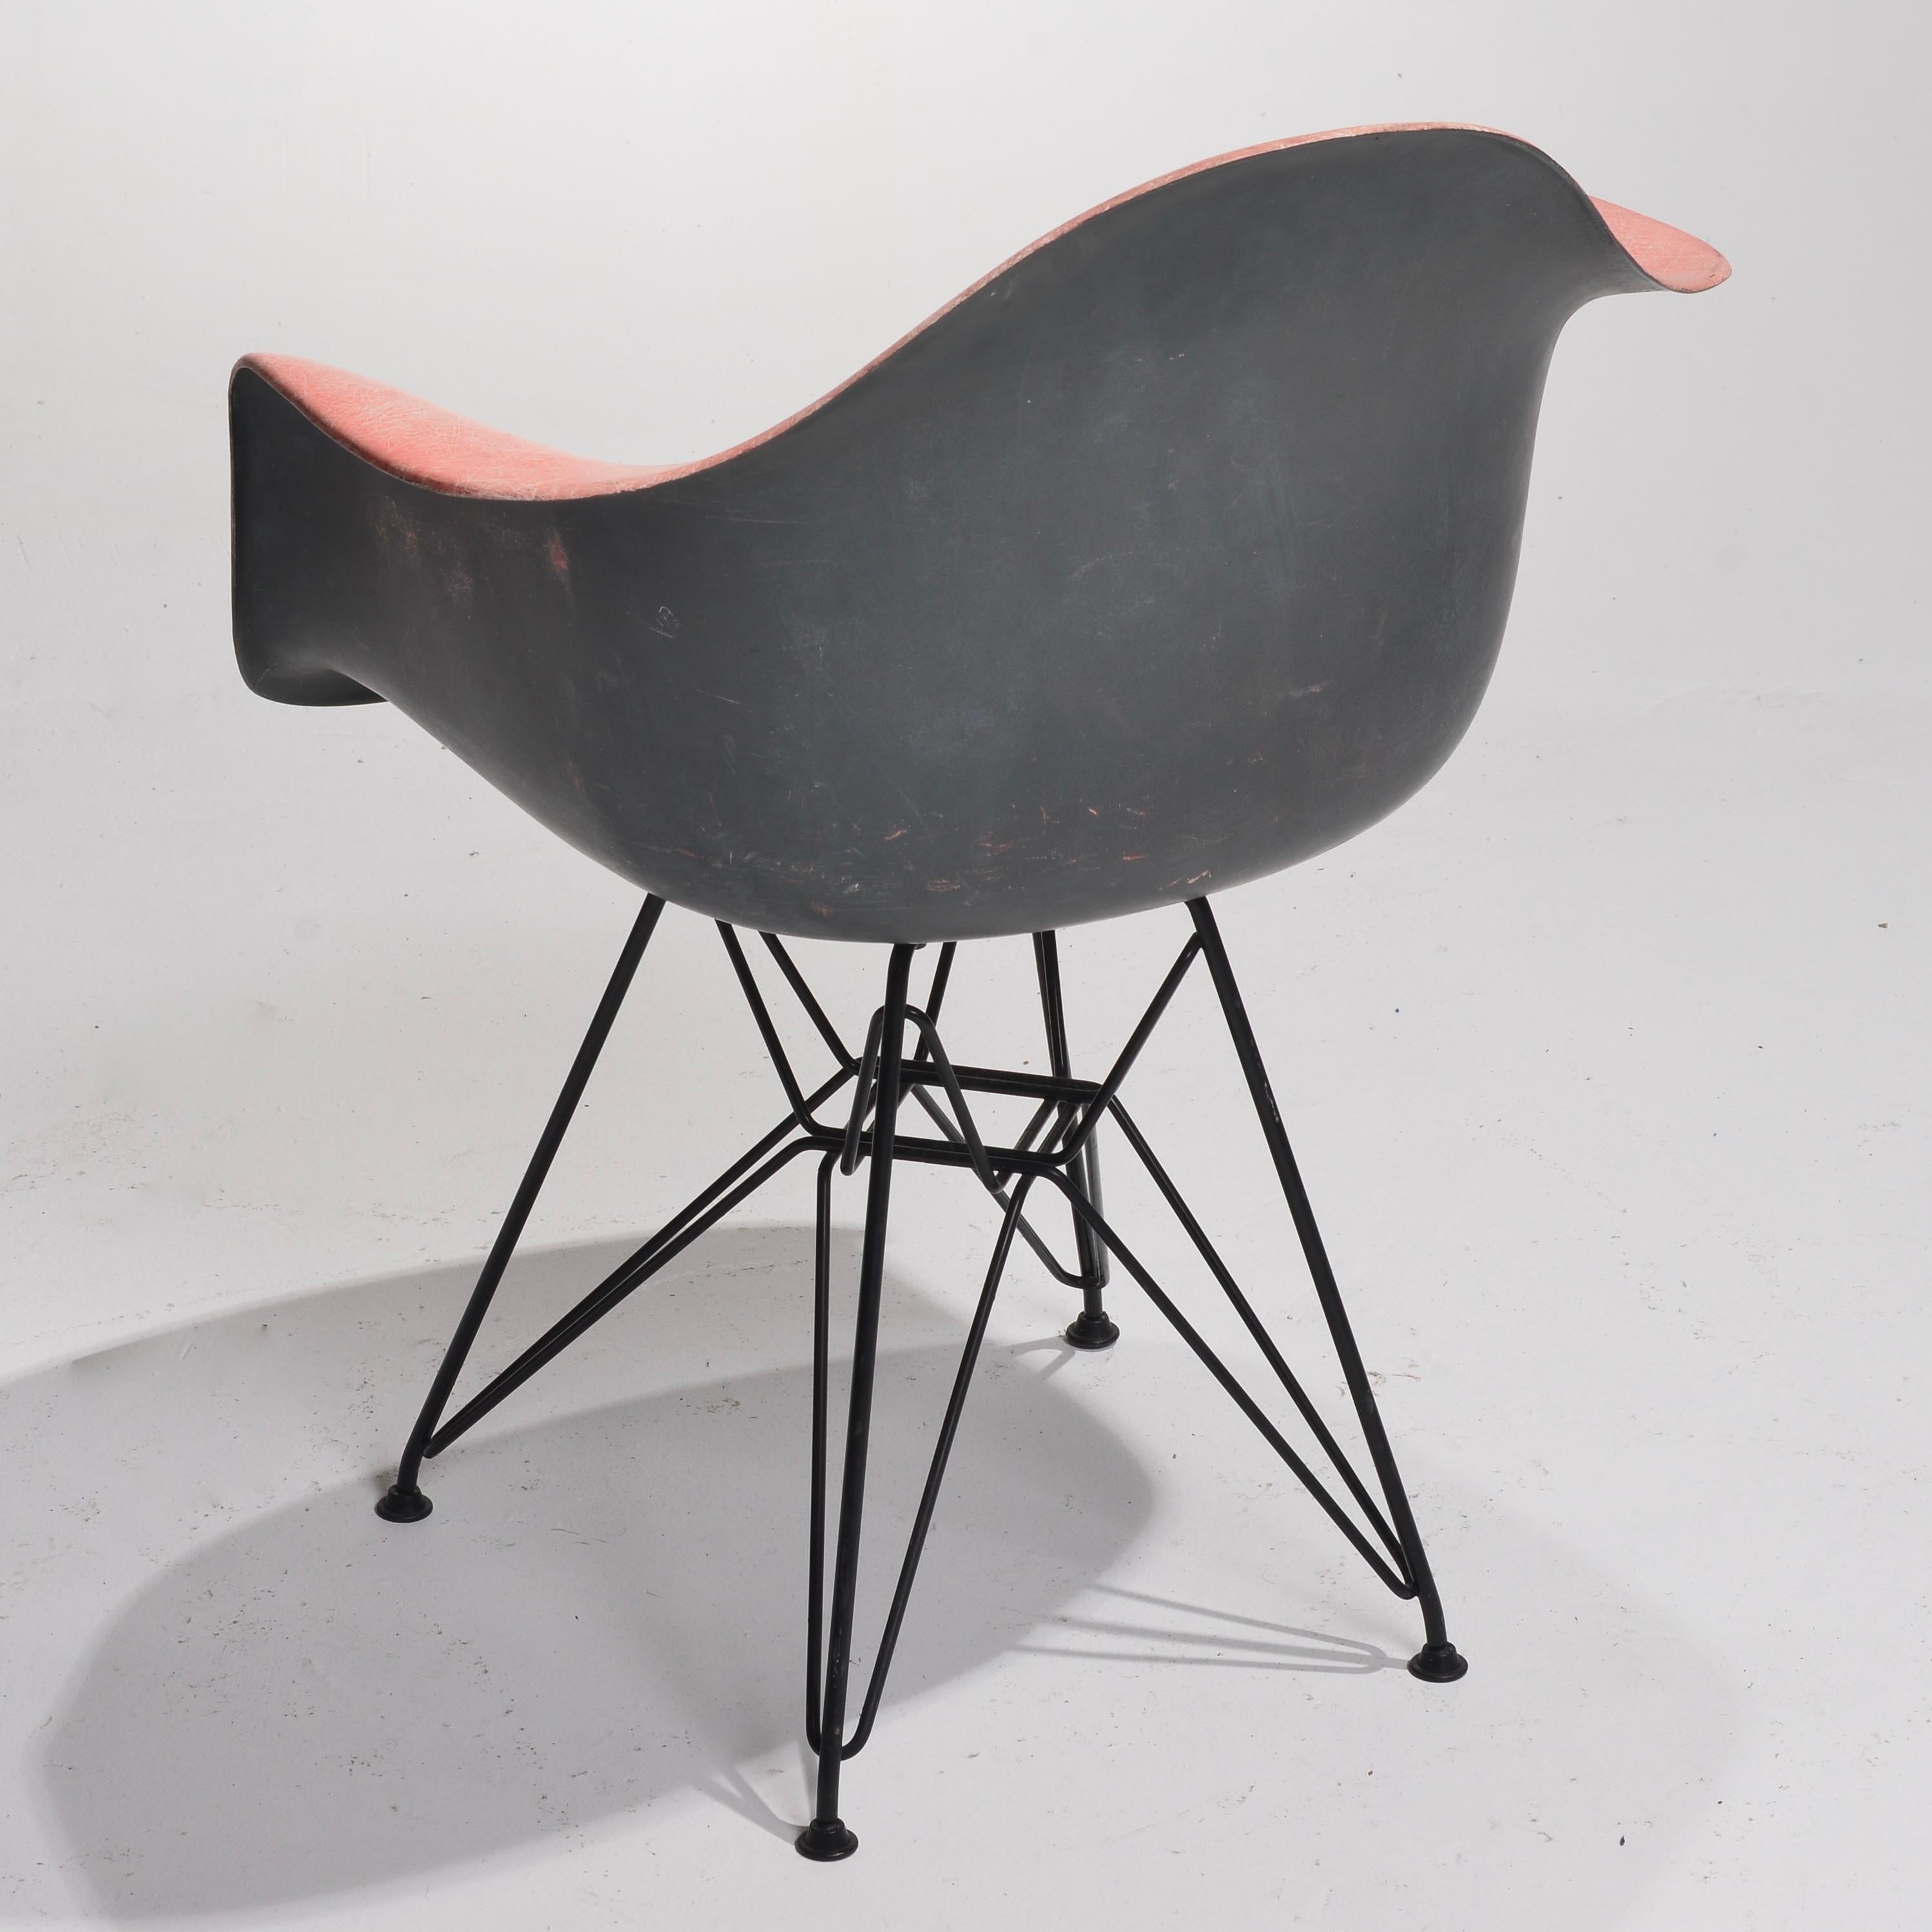 Zenith Charles Eames DAR Fiberglass Shell Chairs For Sale 6